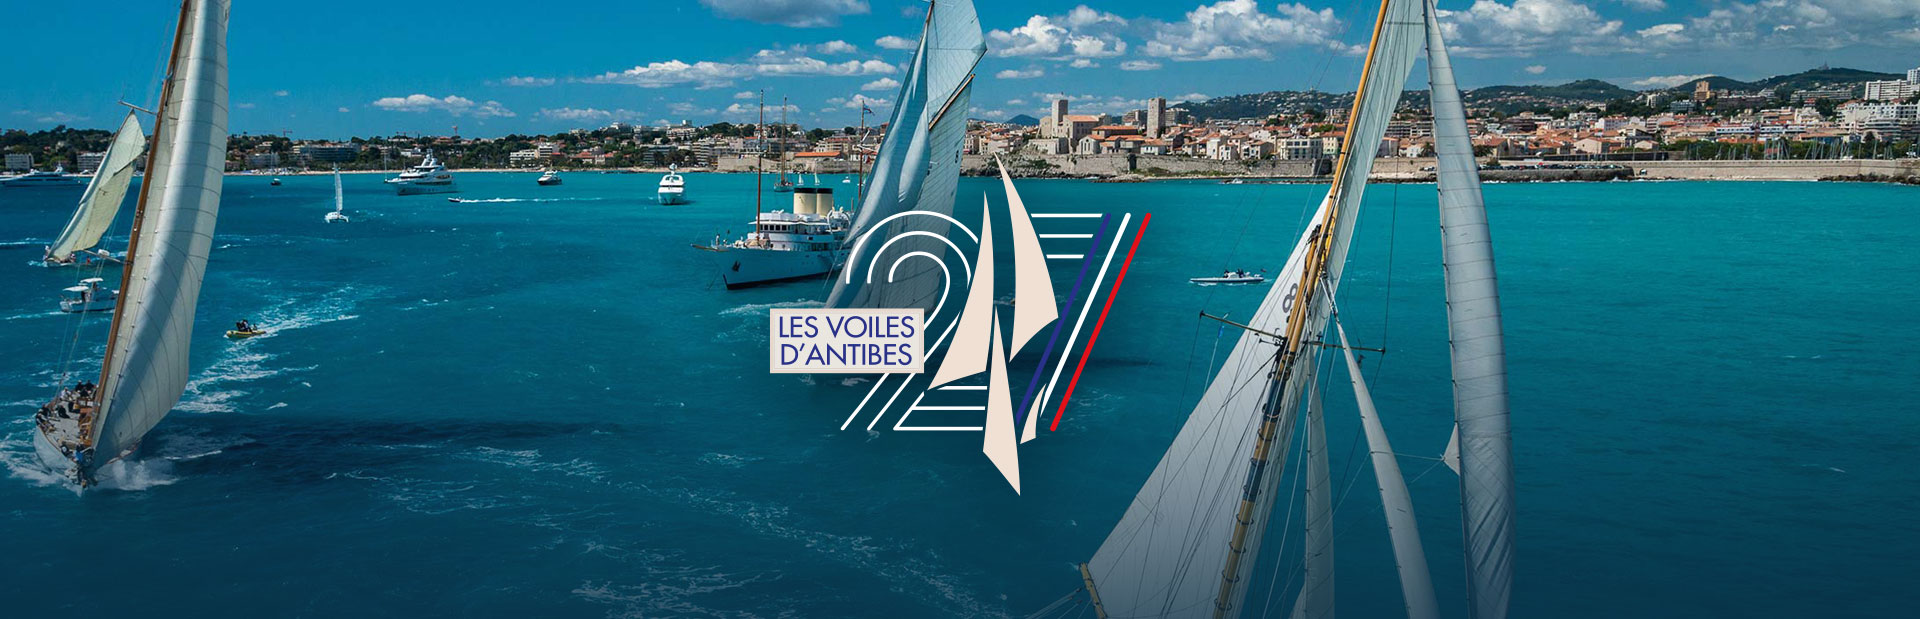 Classic Yachts at Les Voiles d'Antibes on the French Riviera